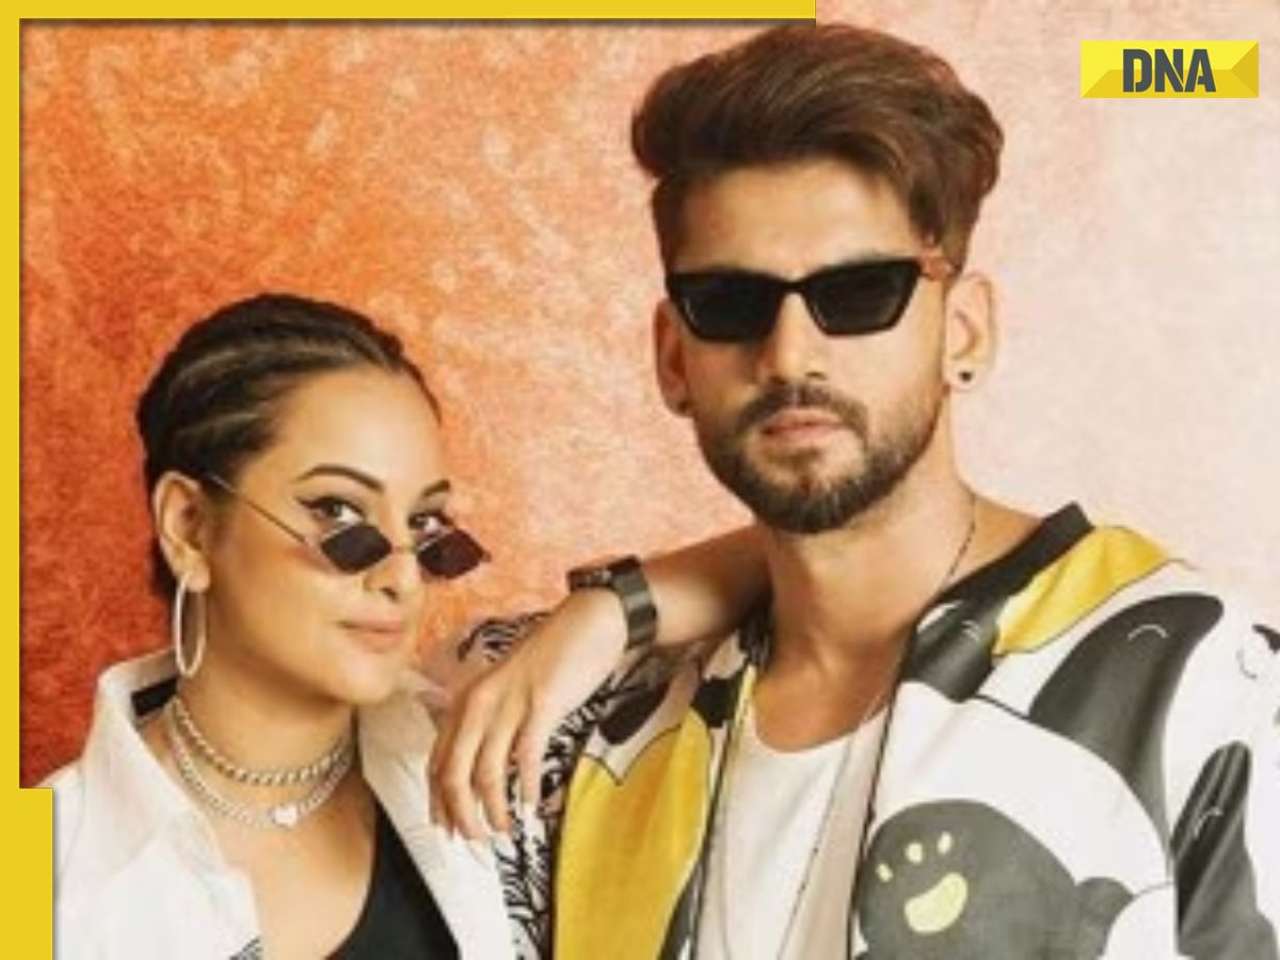 Zaheer Iqbal's father reveals if Sonakshi Sinha will covert to Islam after wedding: 'At the end of the day...'